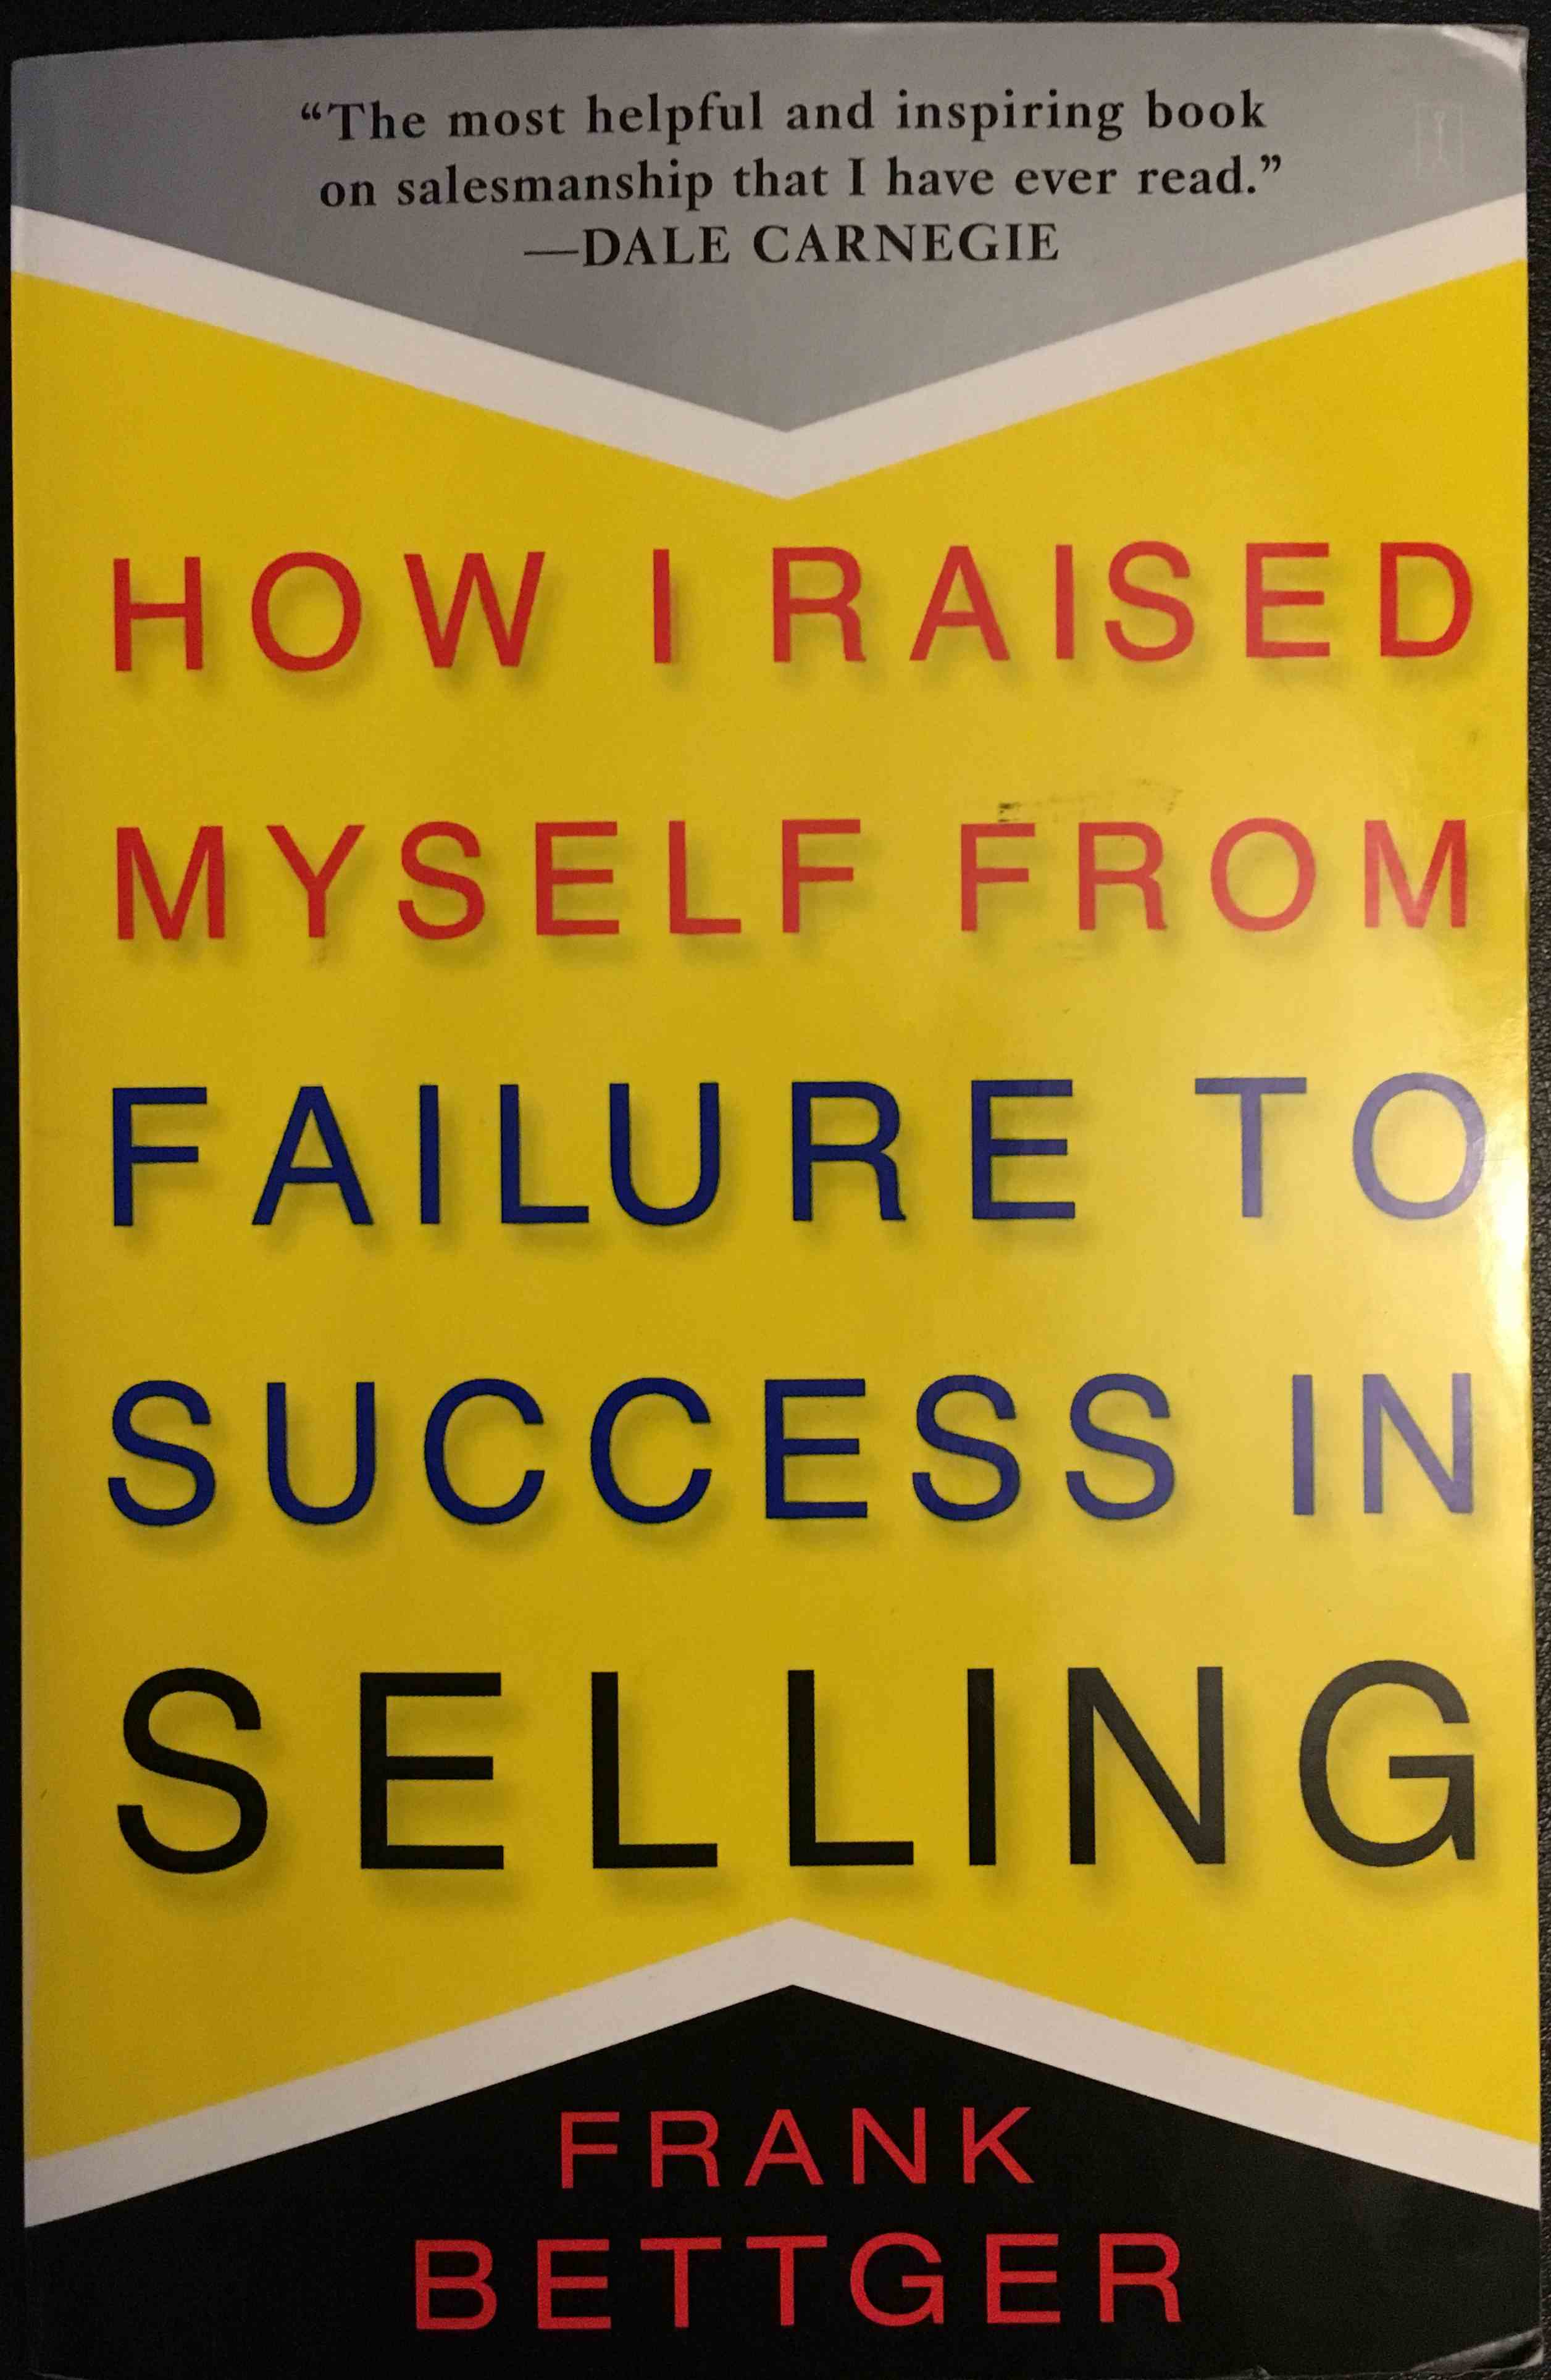 How I Raised Myself From Failure To Success In Selling by Frank Bettger